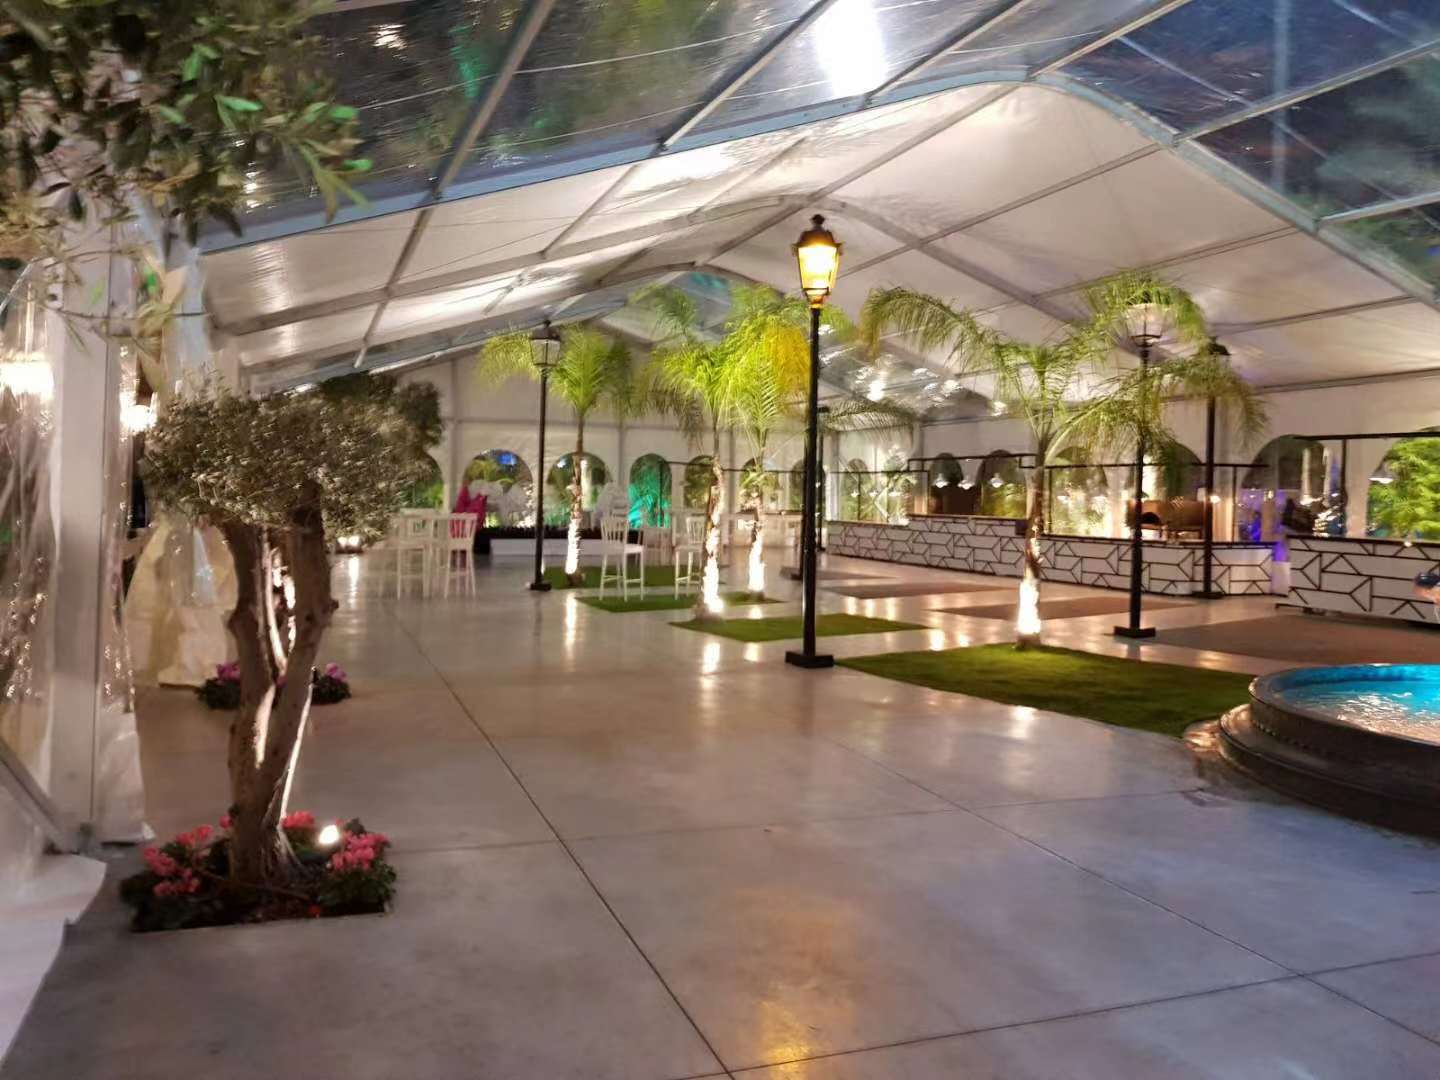 COSCO structure marquee tents prices grassland